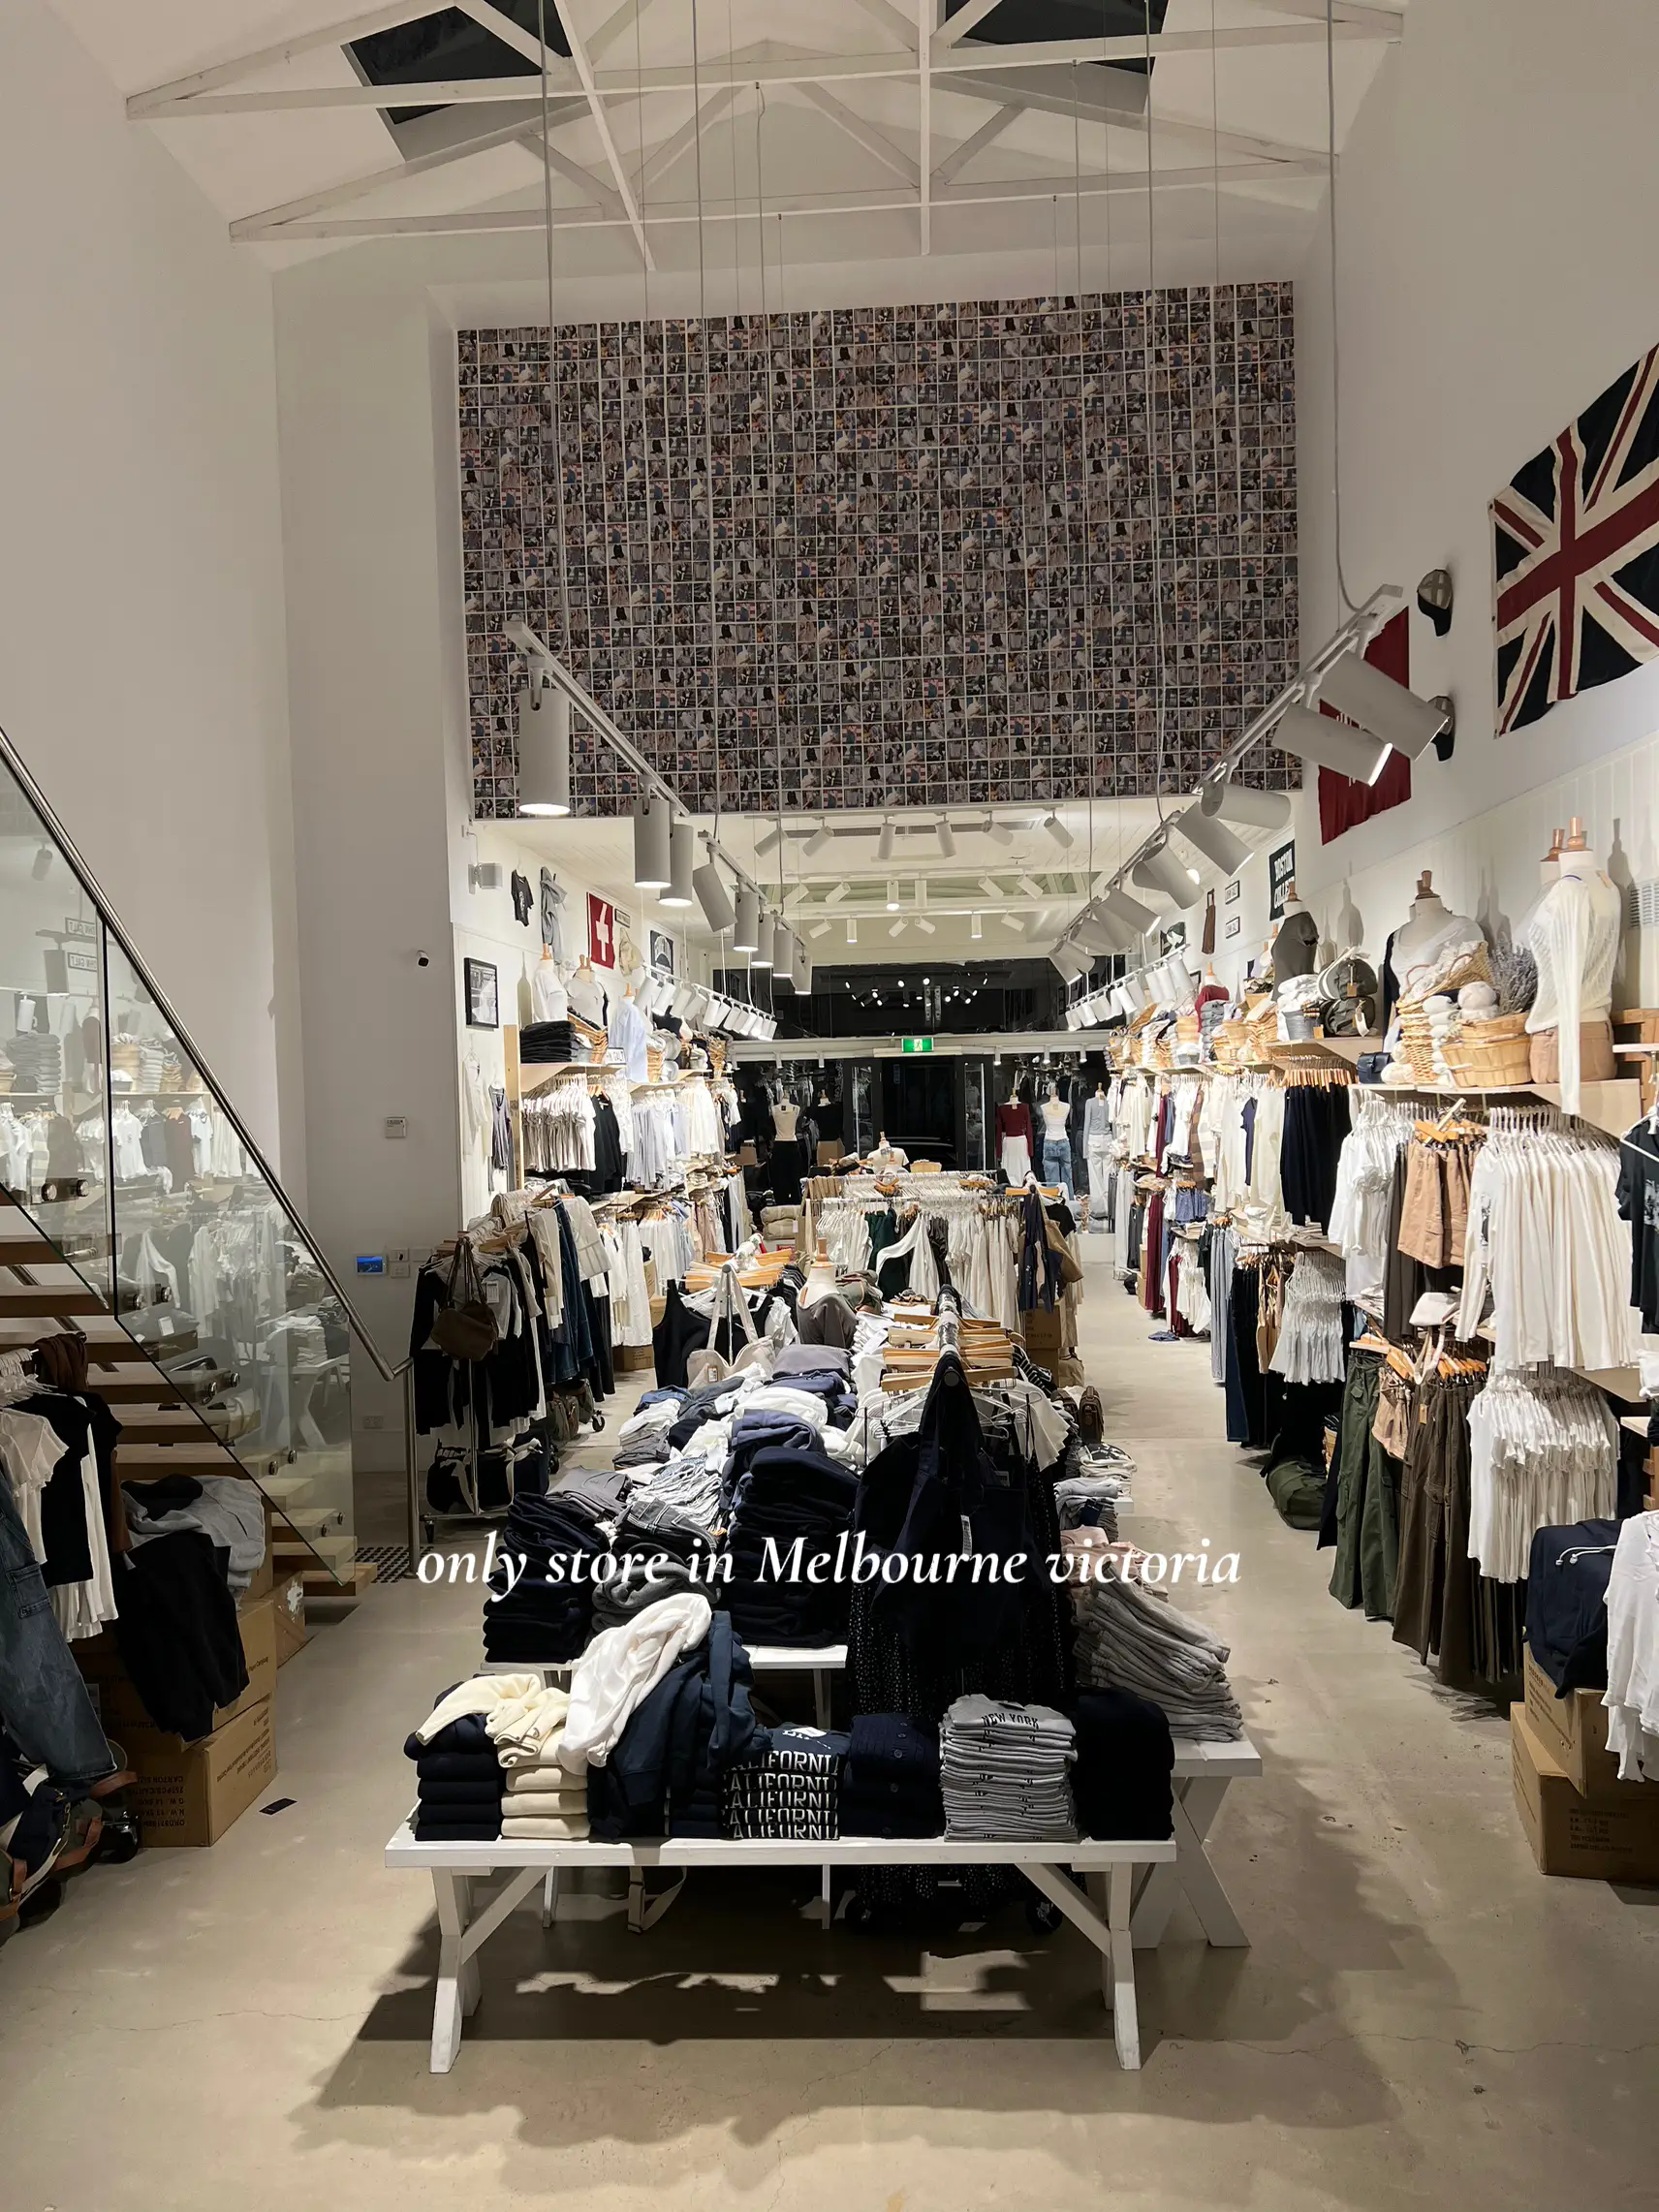 Visiting Melbourne's only Brandy Melville!, Gallery posted by phhoebeliew